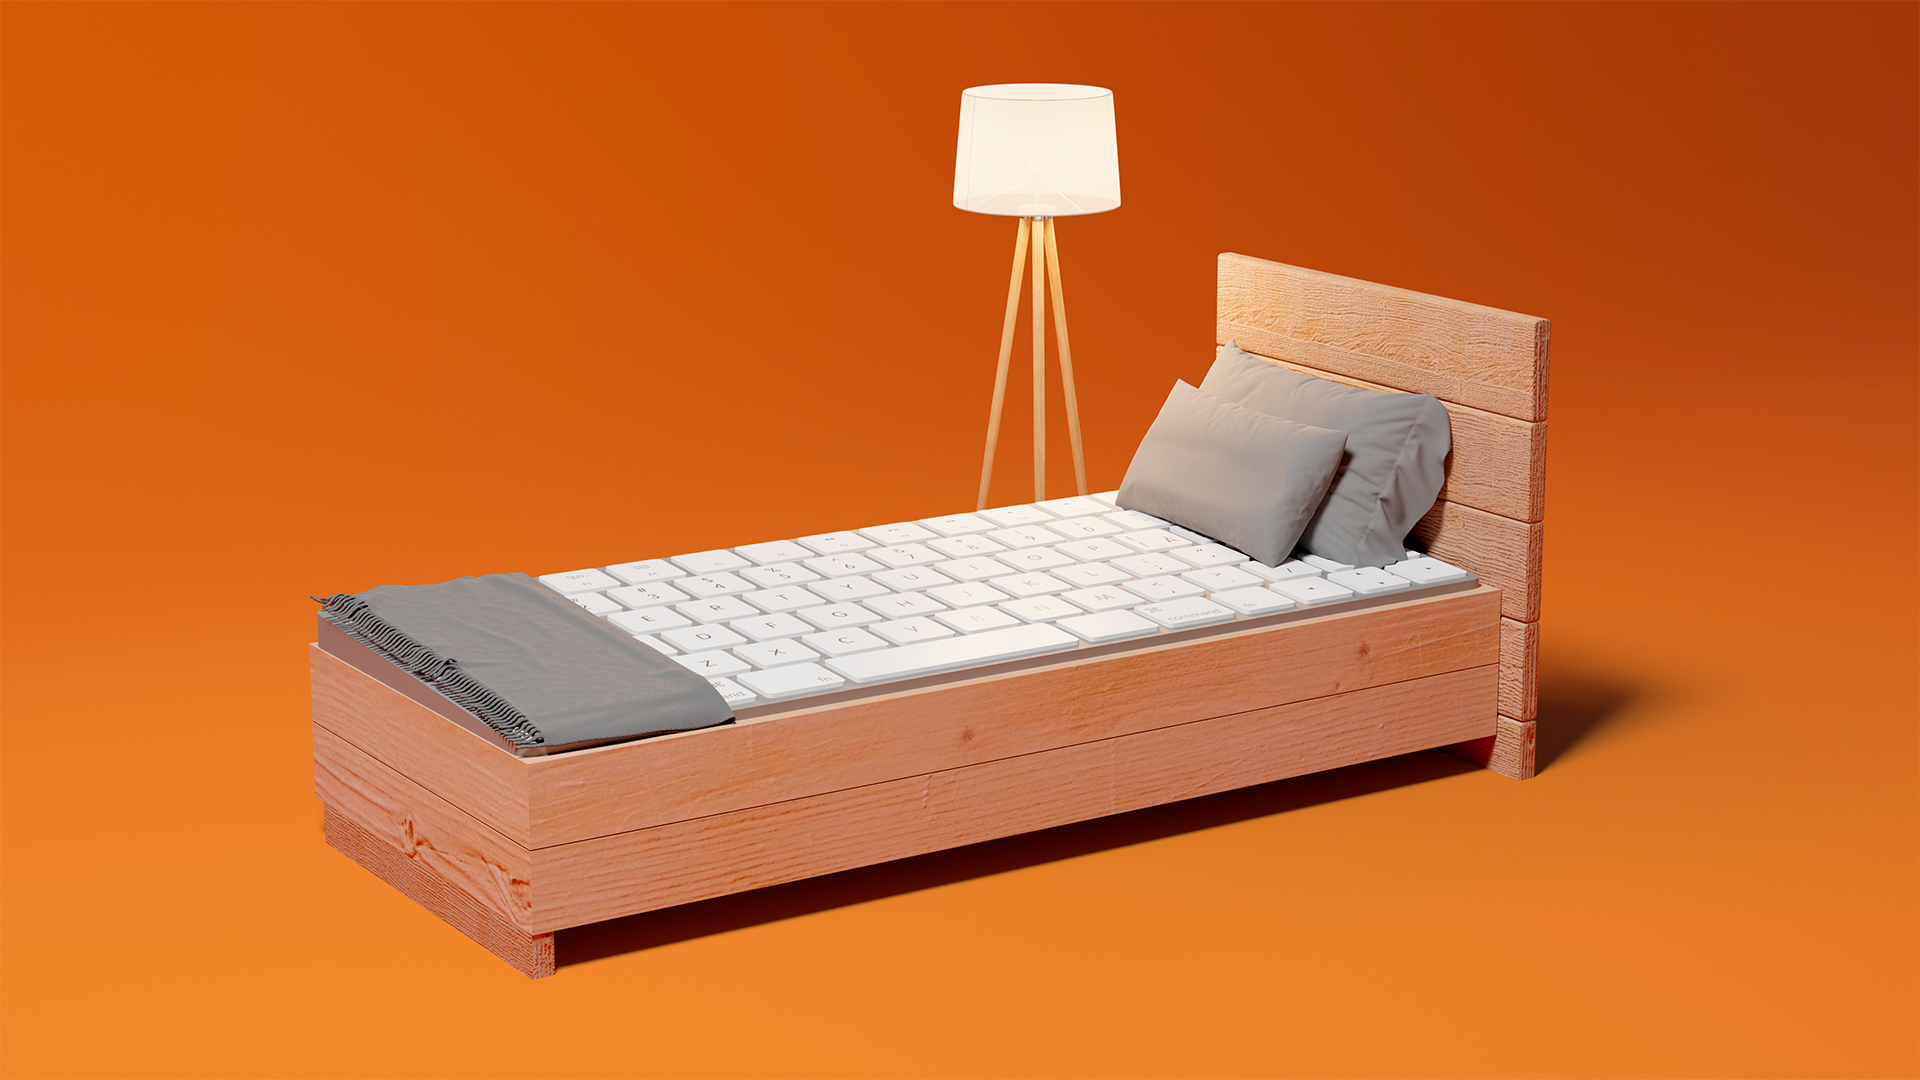 CGI image of a bed with a keyboard on top 